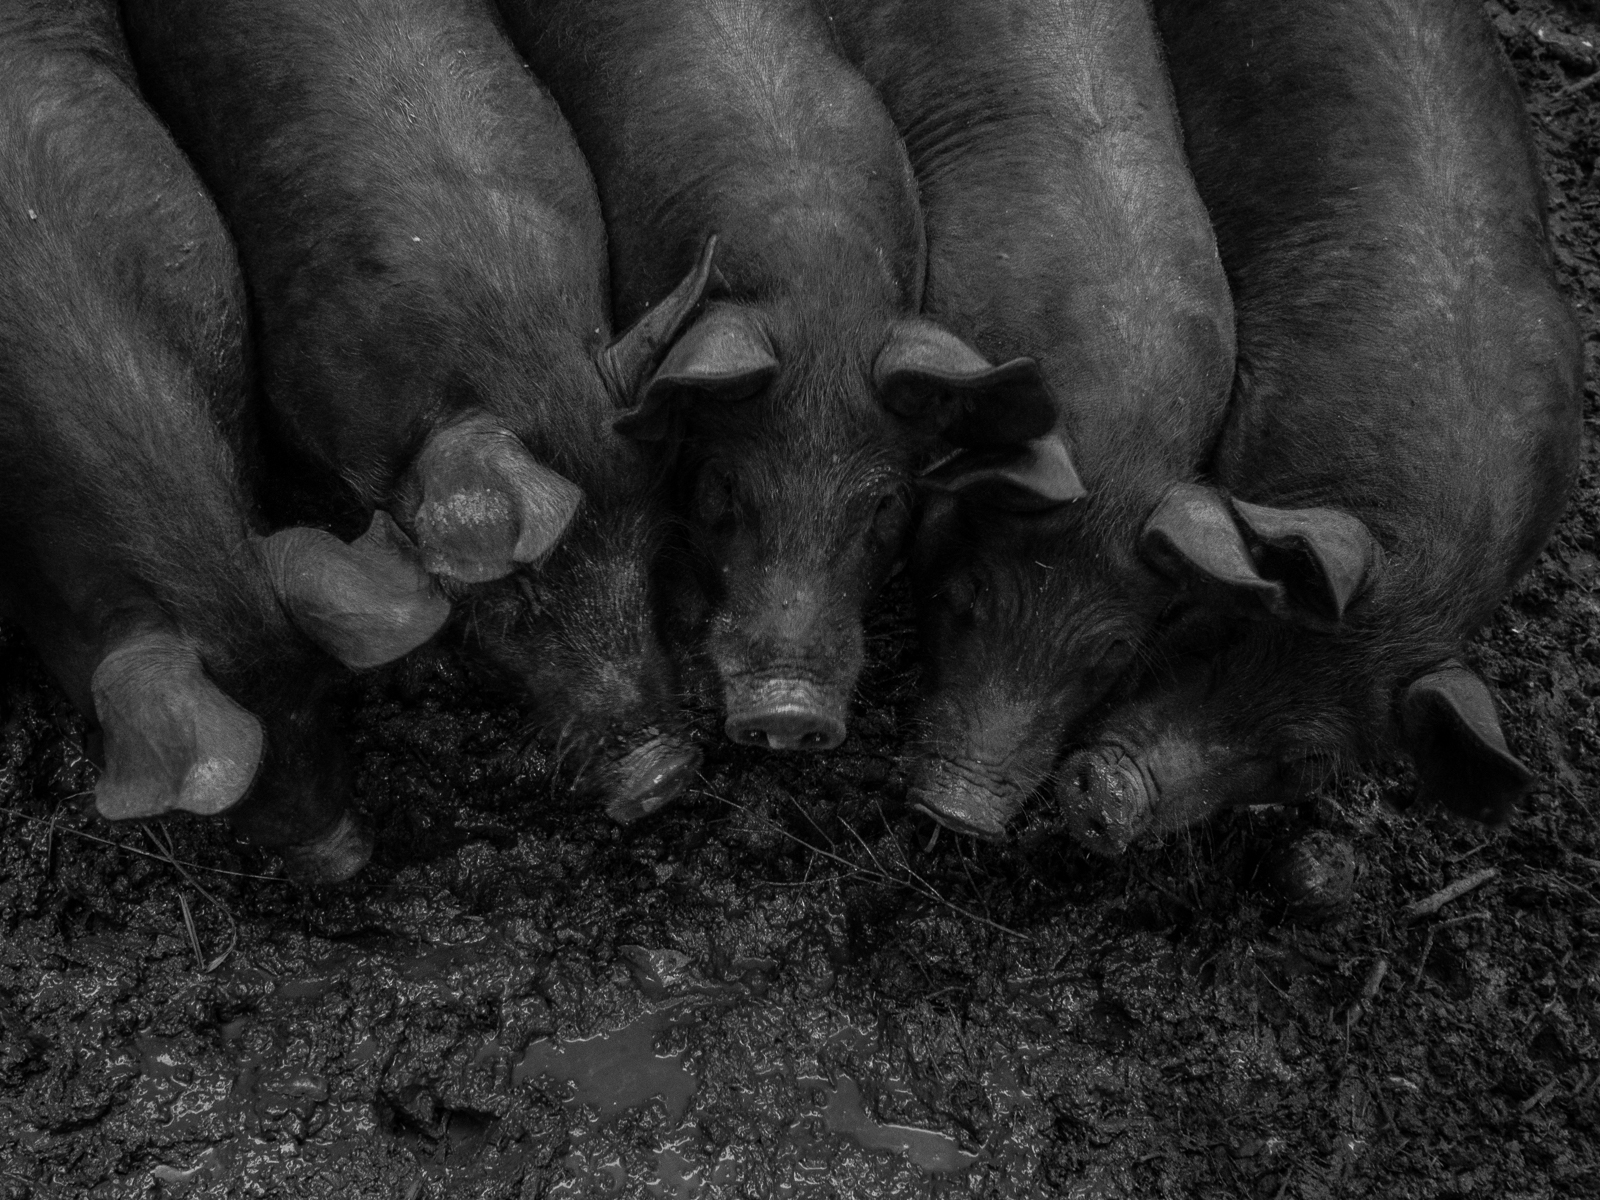 Pigs at Bobolink Dairy and Bakehouse